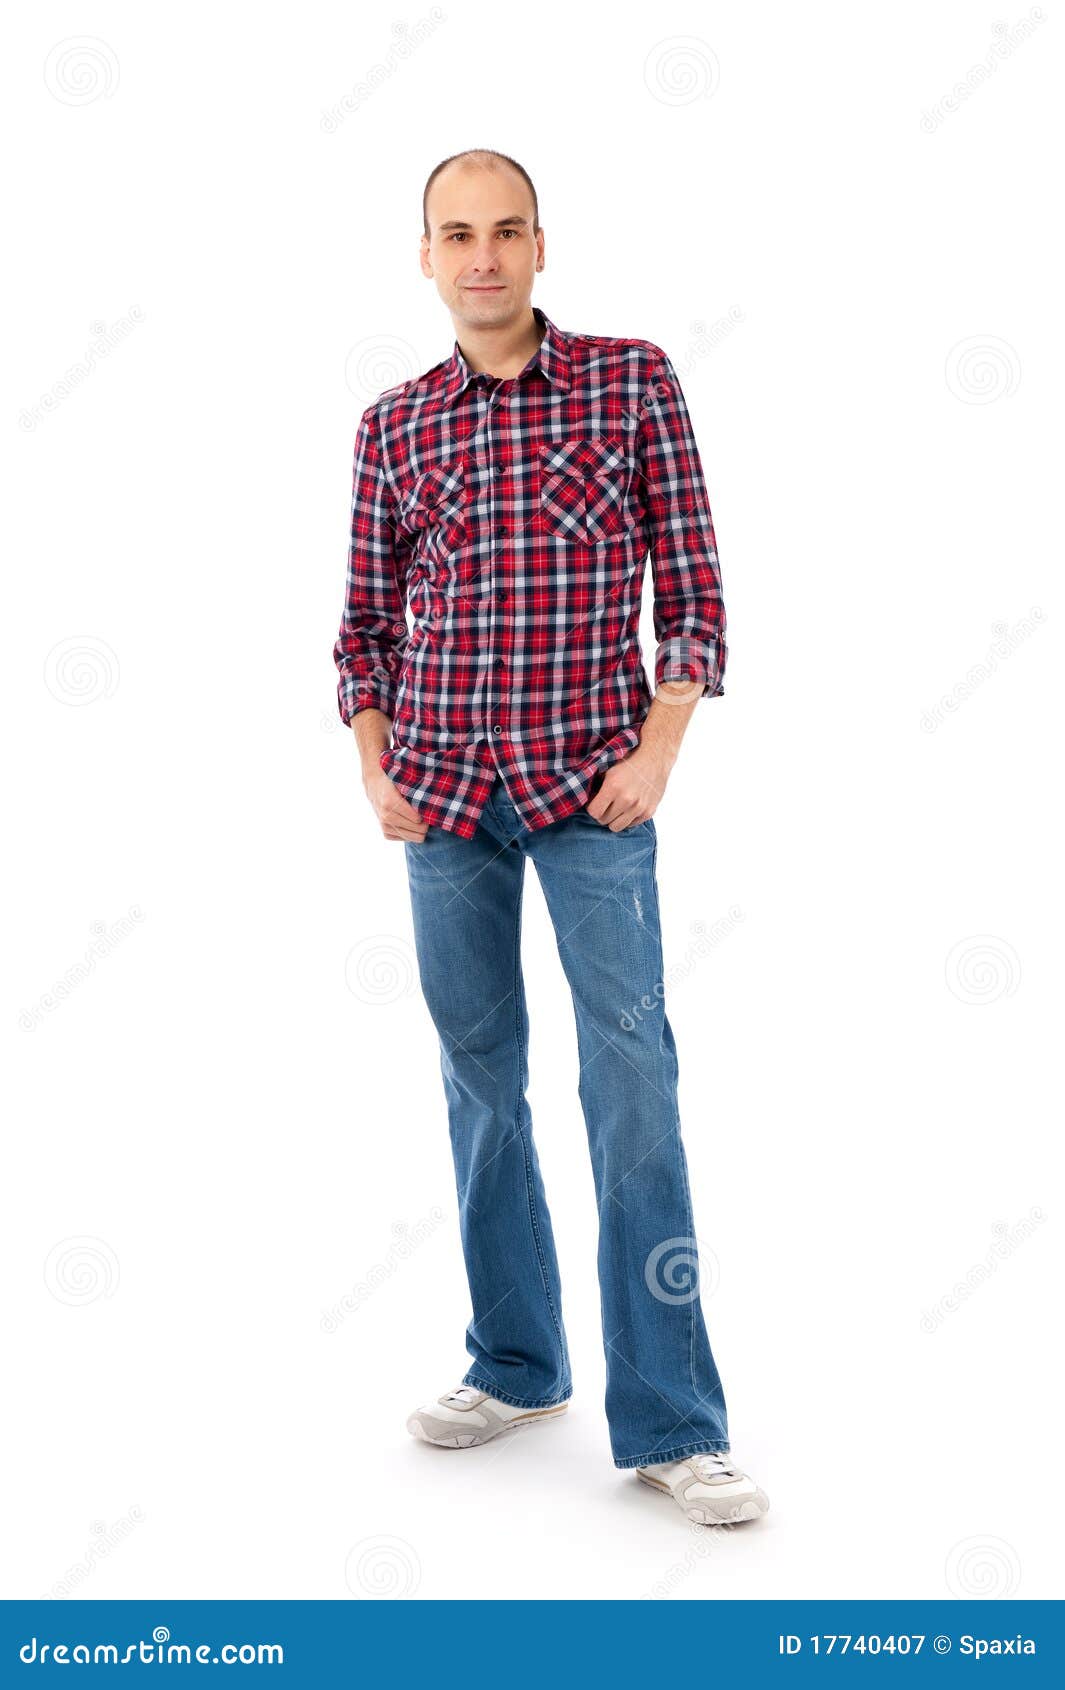 Young casual man full body stock image. Image of attire - 17740407